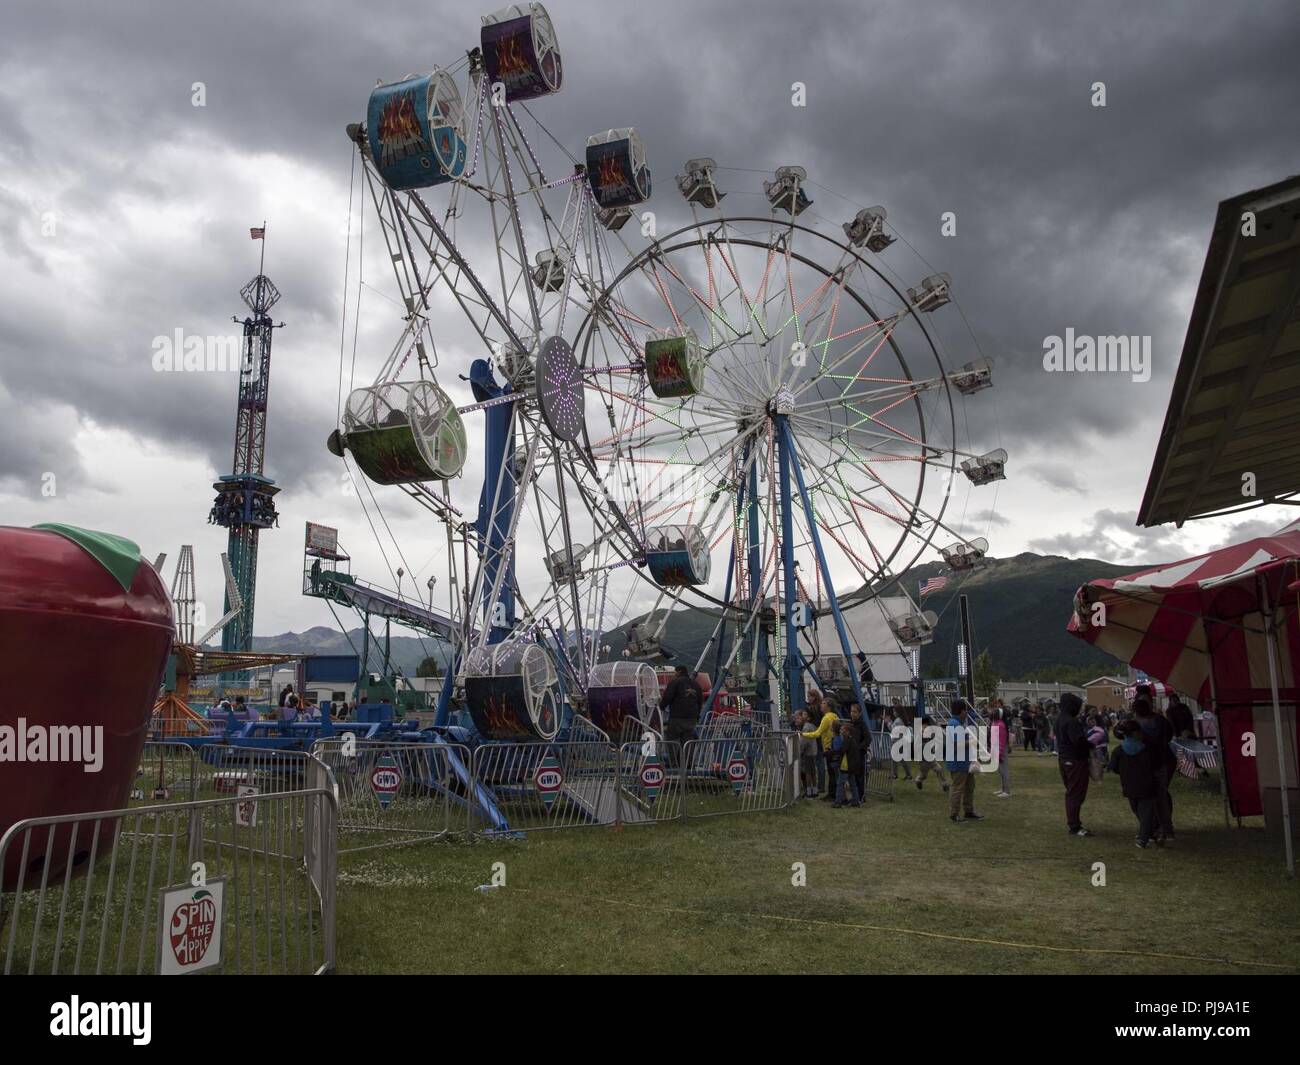 Participants wait in line for amusement rides and games offered during the 3rd annual Summer Fest hosted by the 673d Force Support Squadron at Joint Base Elmendorf-Richardson, Alaska, July 8, 2018. The event was open to anyone with base access and offered free activities such as carnival rides, a petting zoo, face painting, a bungee trampoline, and carnival games. Stock Photo